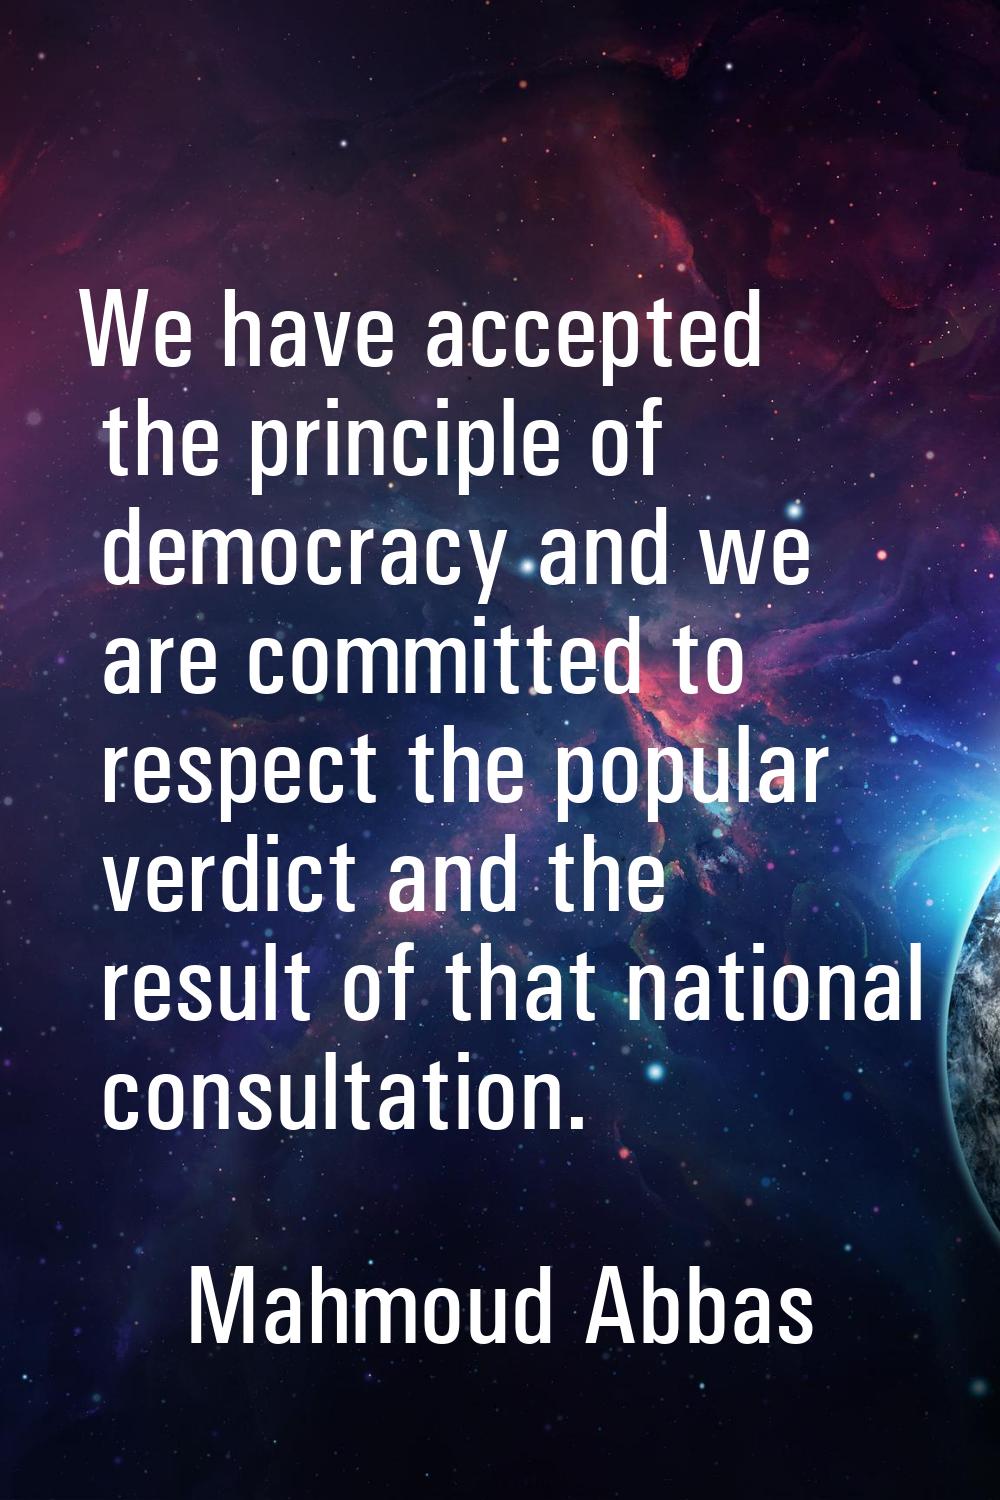 We have accepted the principle of democracy and we are committed to respect the popular verdict and